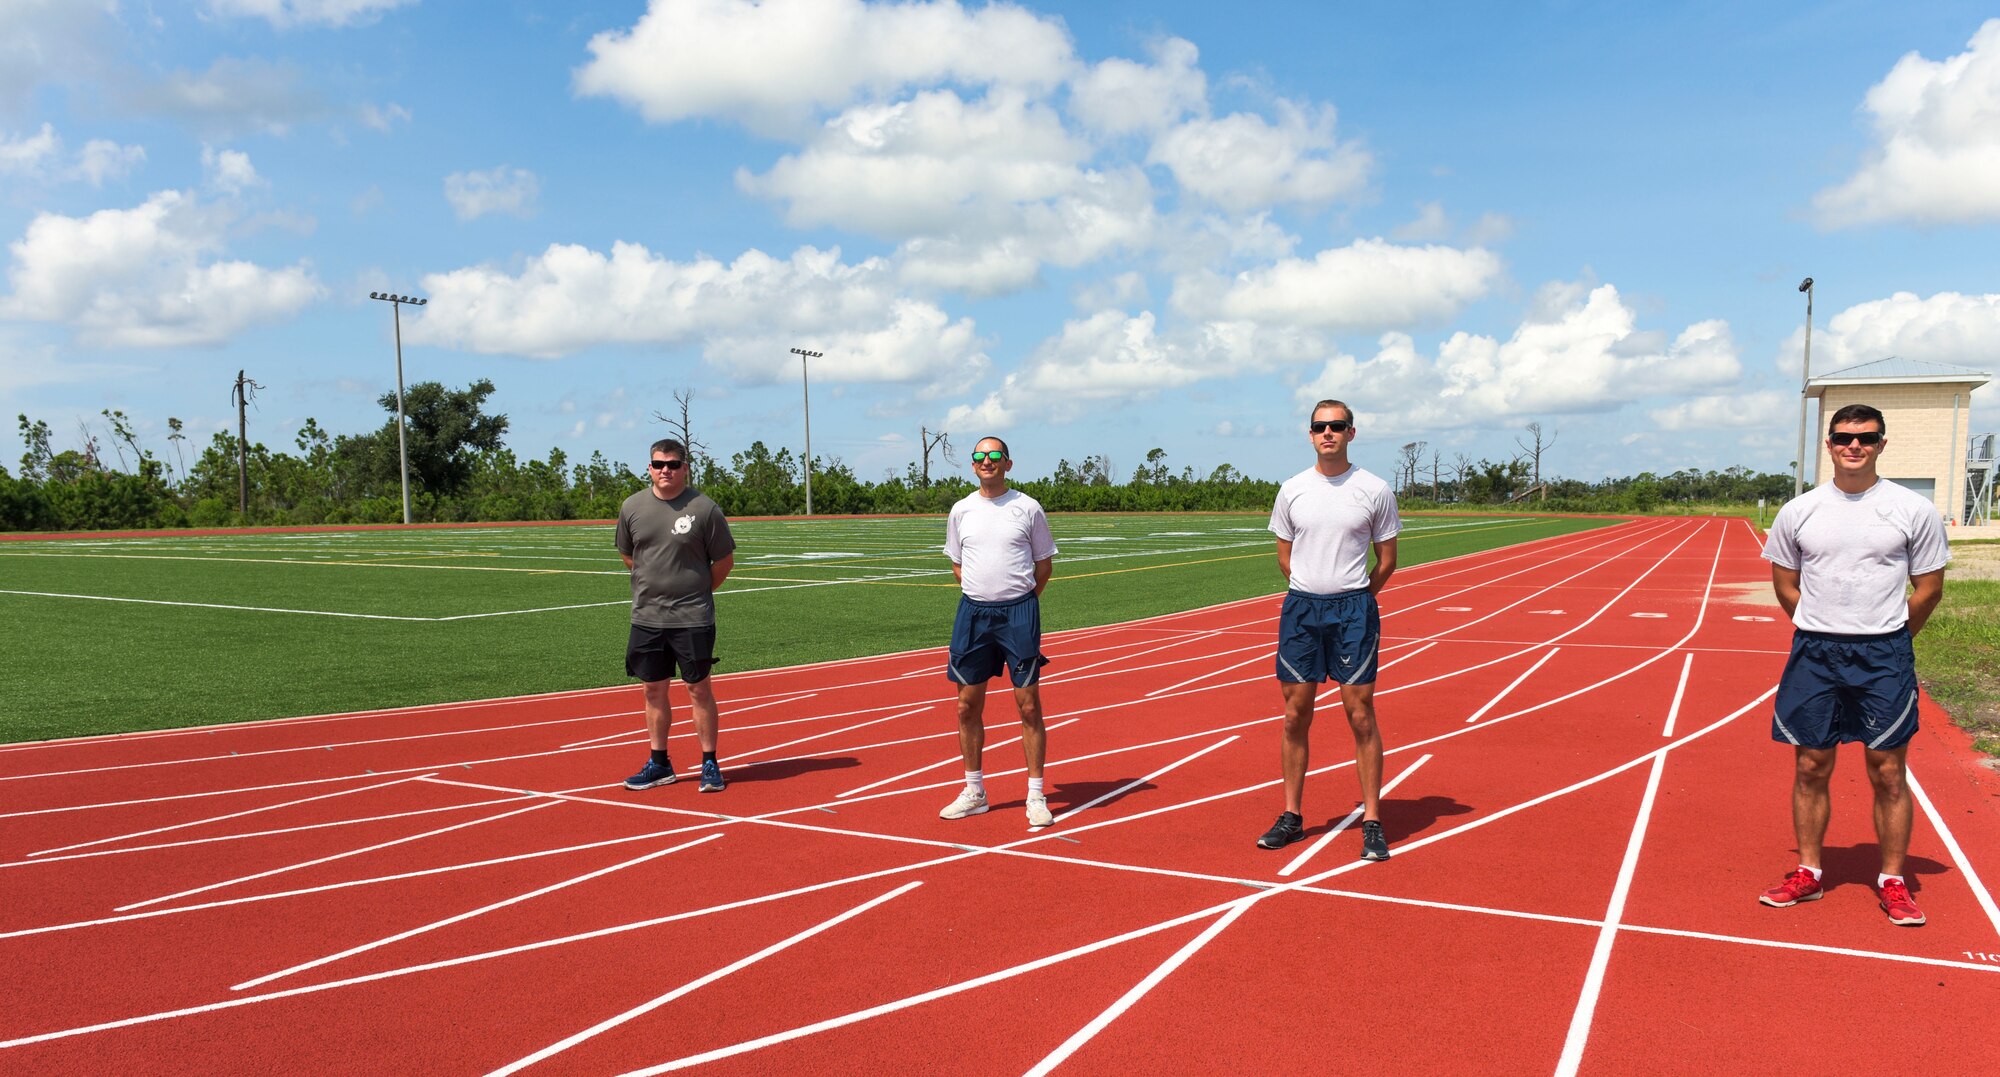 U.S. Air Force Staff Sgt. Aaron Bell with the 325th Force Support Squadron, left, Capt. Robert Friedman with the Air Force Legal Operations Agency, Tech. Sgt. Joshua Skinner with the 601st Air Operations Center, and Capt. Kyle Imhoff with the Air Force Civil Engineer Center, right, pose for a photo on the fitness track at Tyndall Air Force Base, Florida, Sept. 8, 2020. Bell led the Focus 5/6 group that organized a running fitness event for Airmen during the month of August. The top three runners were recognized and included Skinner with 348 miles, Friedman with 356 miles, and Imhoff with 366 miles. (U.S. Air Force photo by Staff Sgt. Magen M. Reeves)